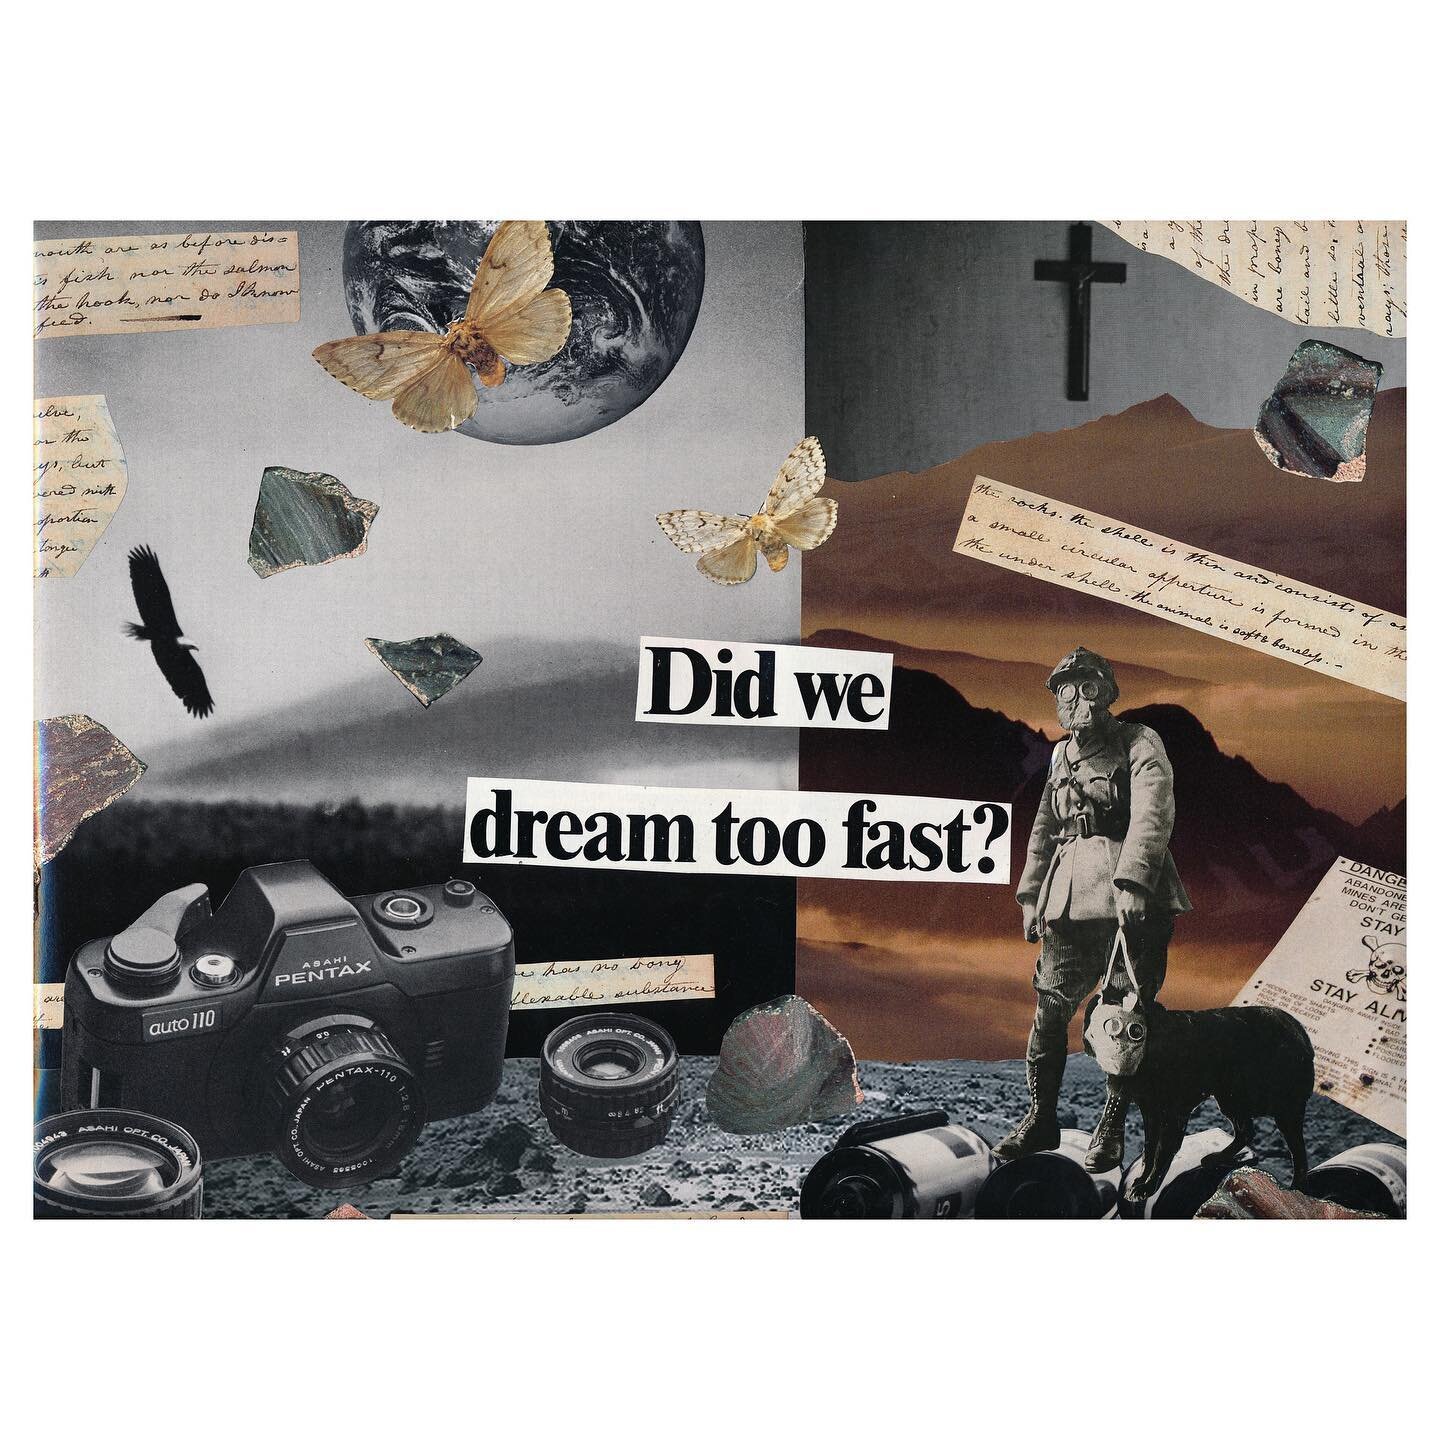 &ldquo;did we dream too fast?&rdquo; / a hand-cut and pasted collage composed of images from vintage national geographic magazines.